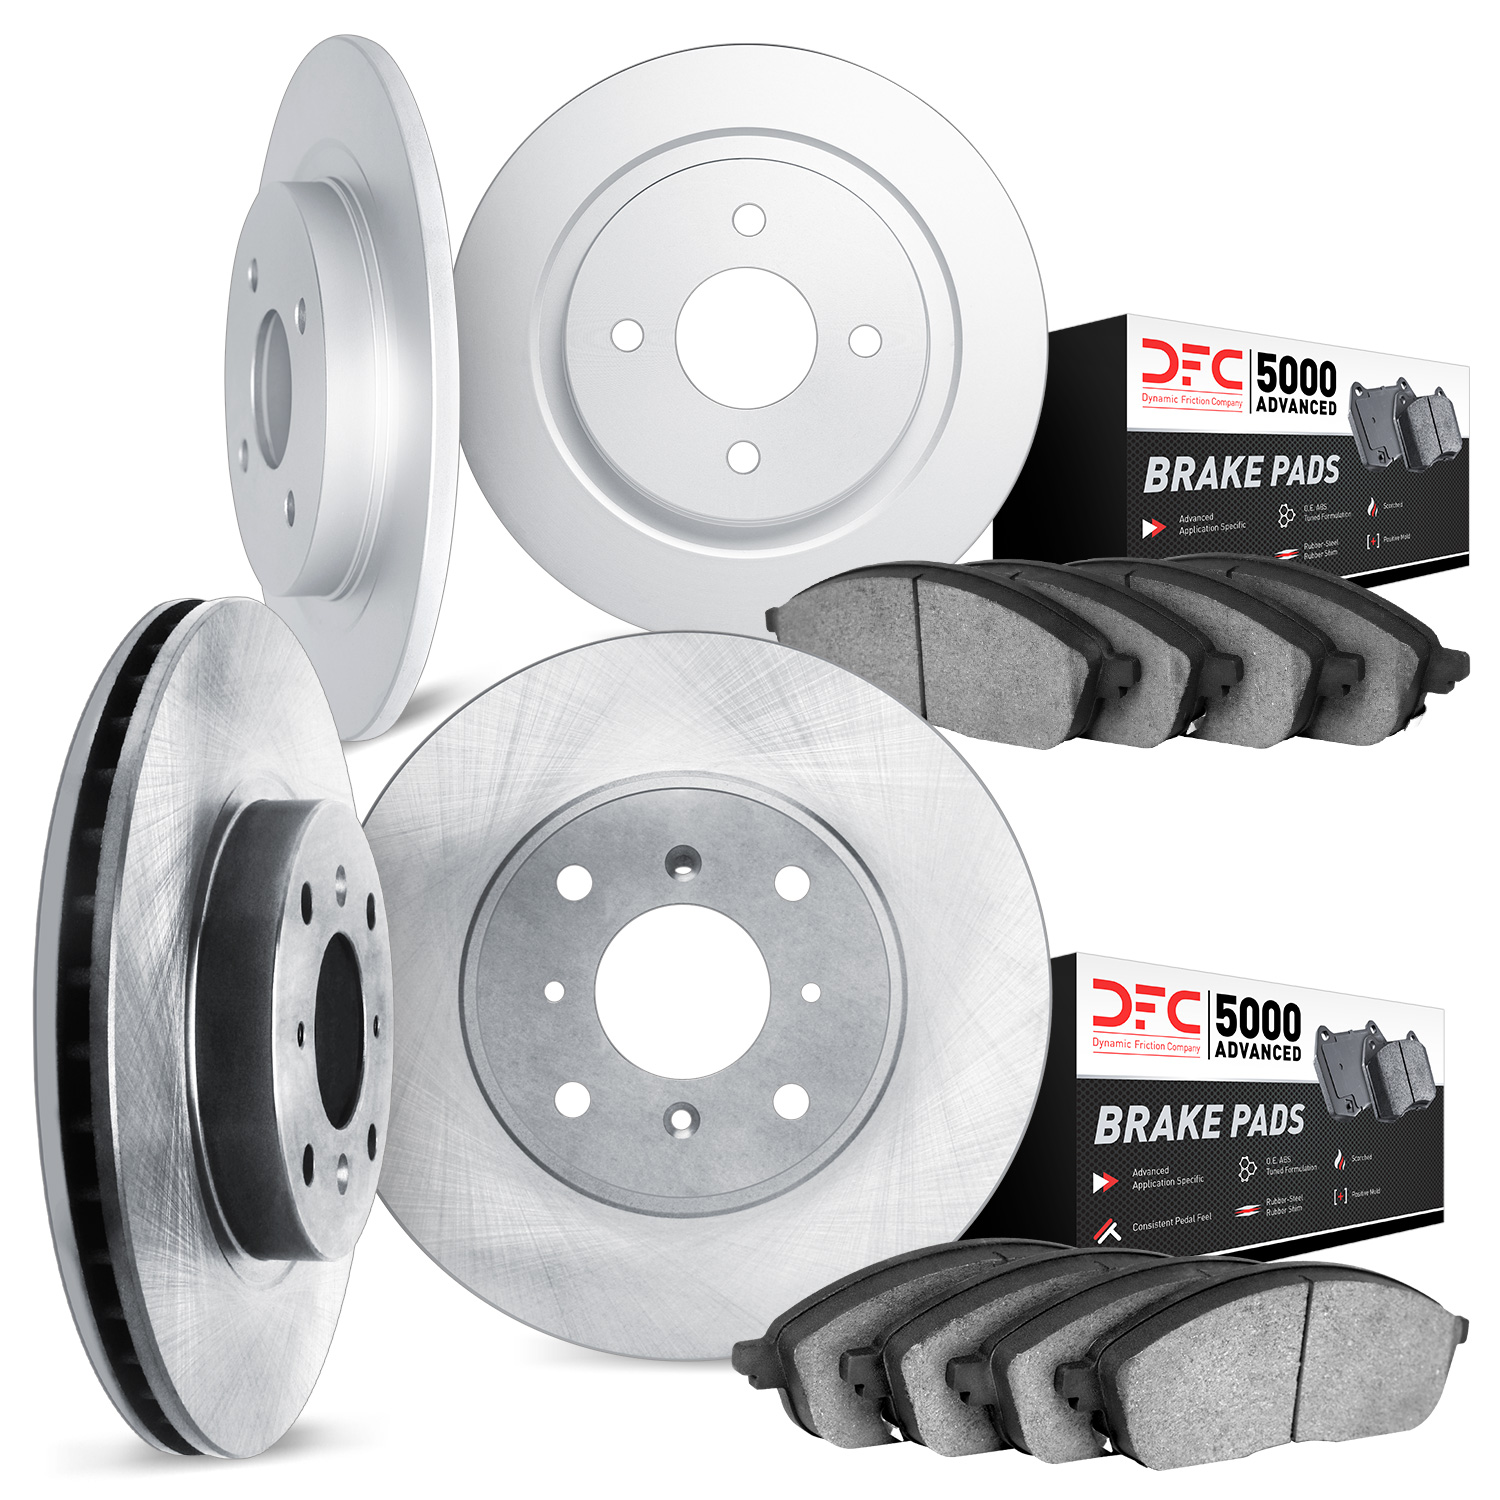 6504-03049 Brake Rotors w/5000 Advanced Brake Pads Kit, 2012-2017 Multiple Makes/Models, Position: Front and Rear